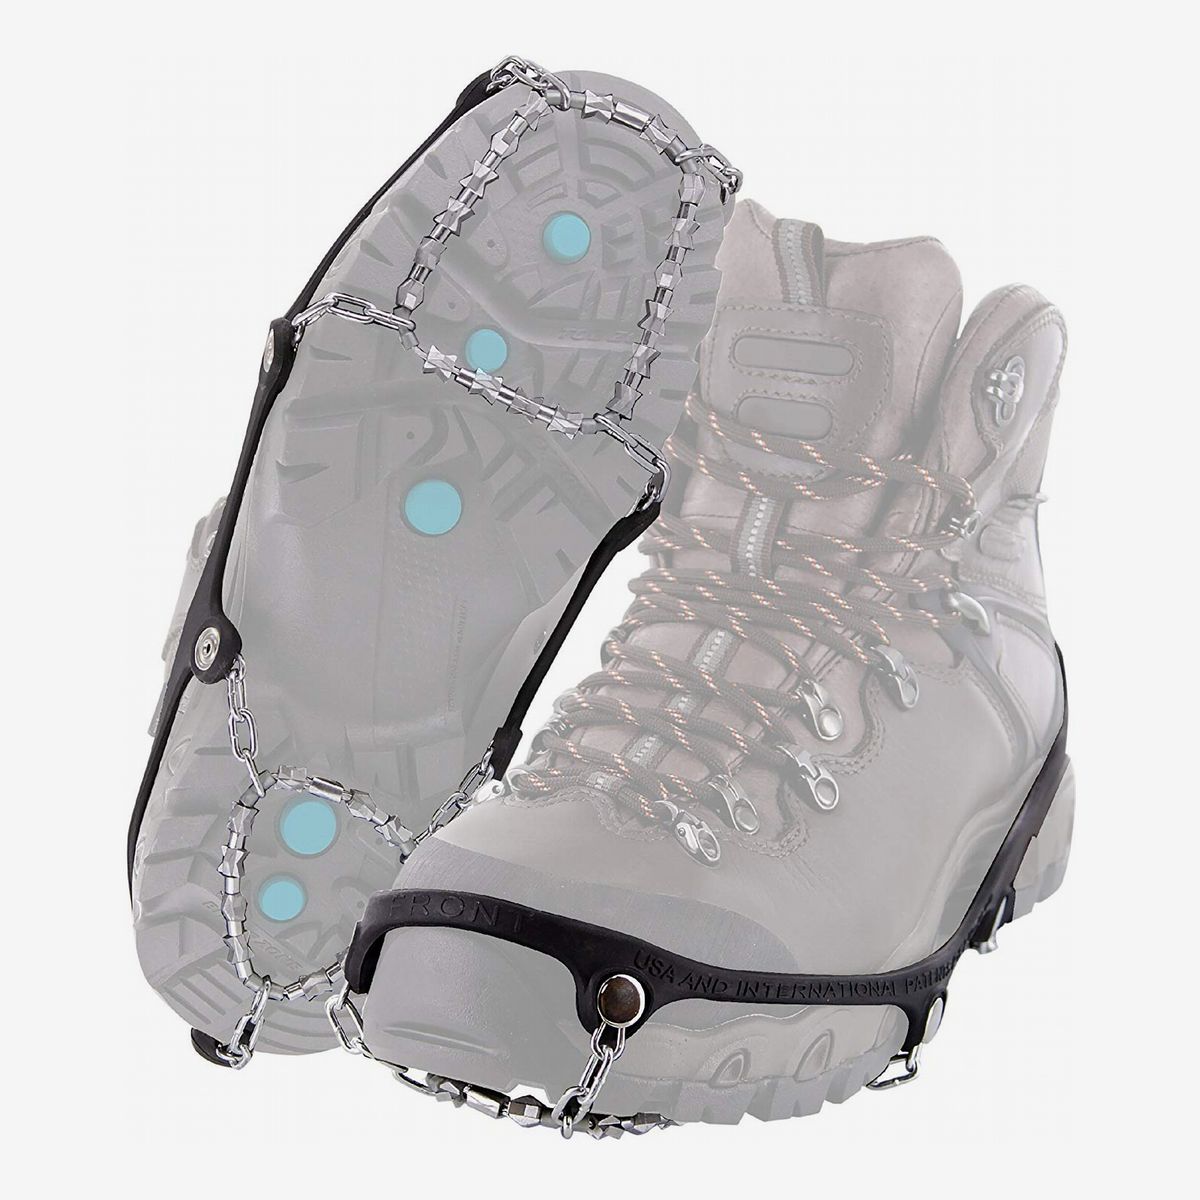 TRIWONDER Ice Grips Cleats Spikes Anti-slip 10 Studs Shoe/Boot Snow Ice Traction Crampons Grippers 